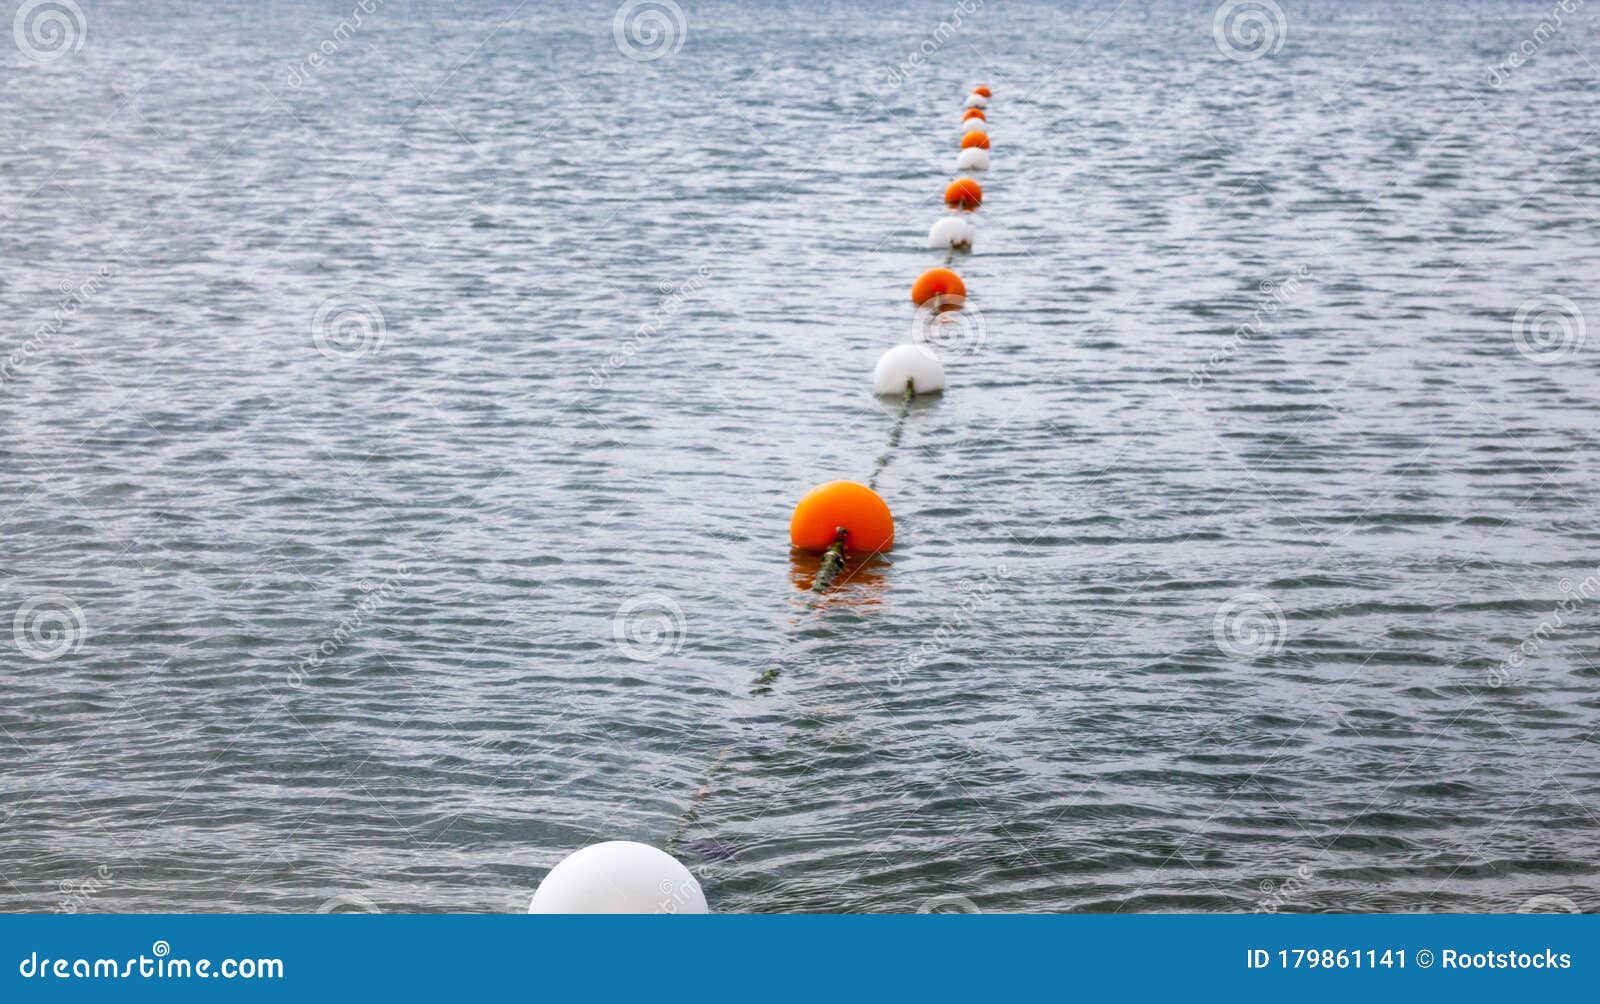 Safety Rope and Float Line in the Sea Stock Image - Image of